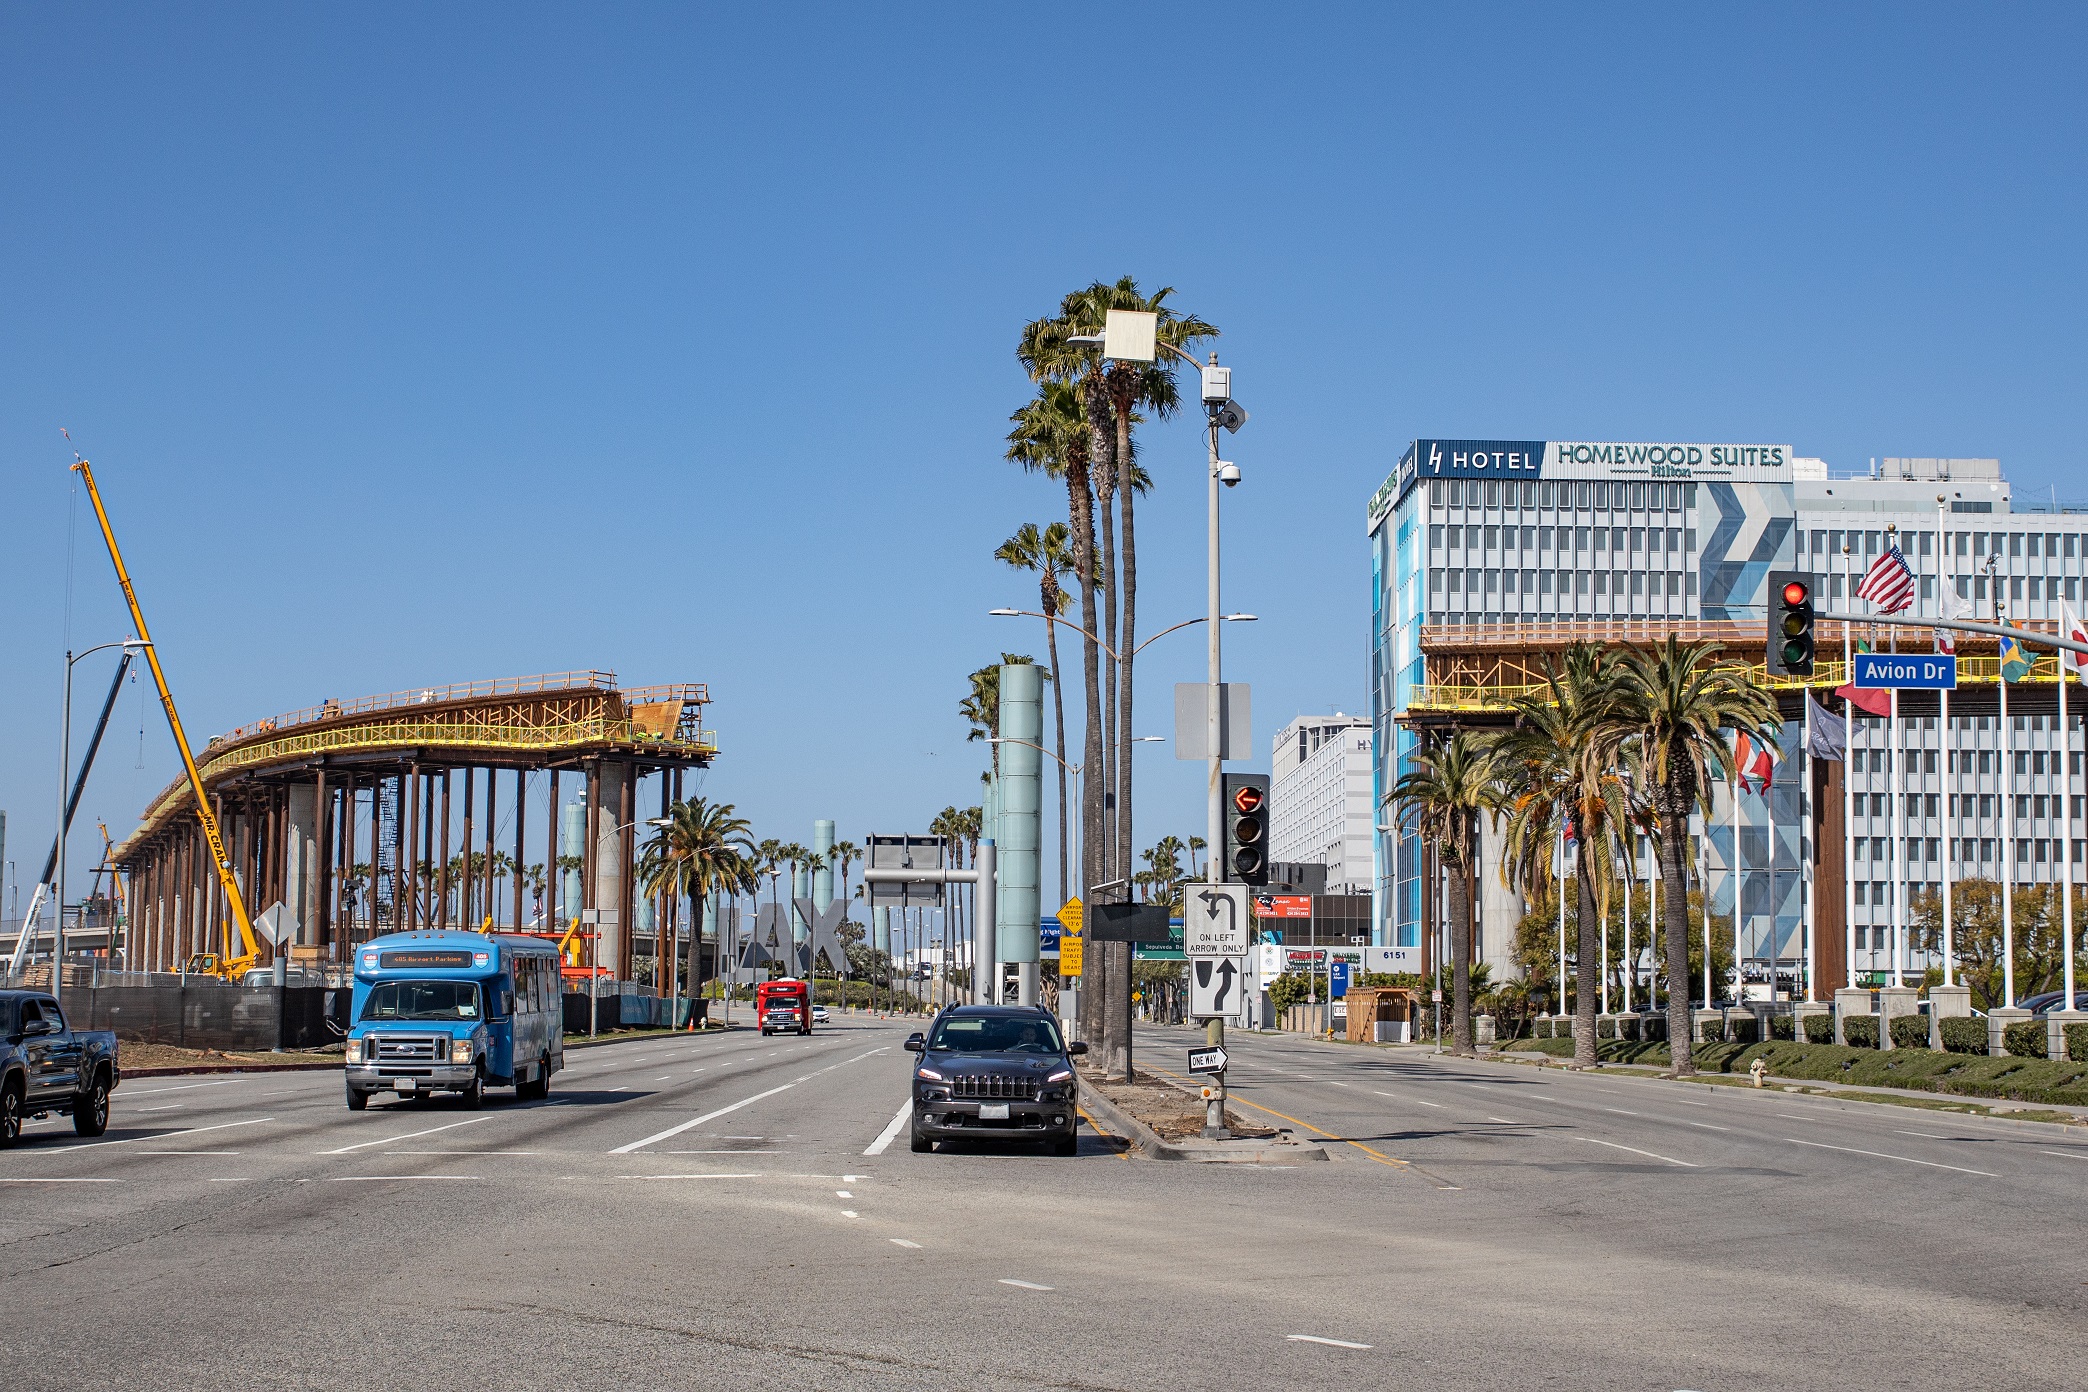 Once construction of the Automated People Mover guideway superstructure to the north and south of Century Boulevard is complete, crews will span the roadway using a cast-in-place technique that utilizes a traveling form instead of falsework.